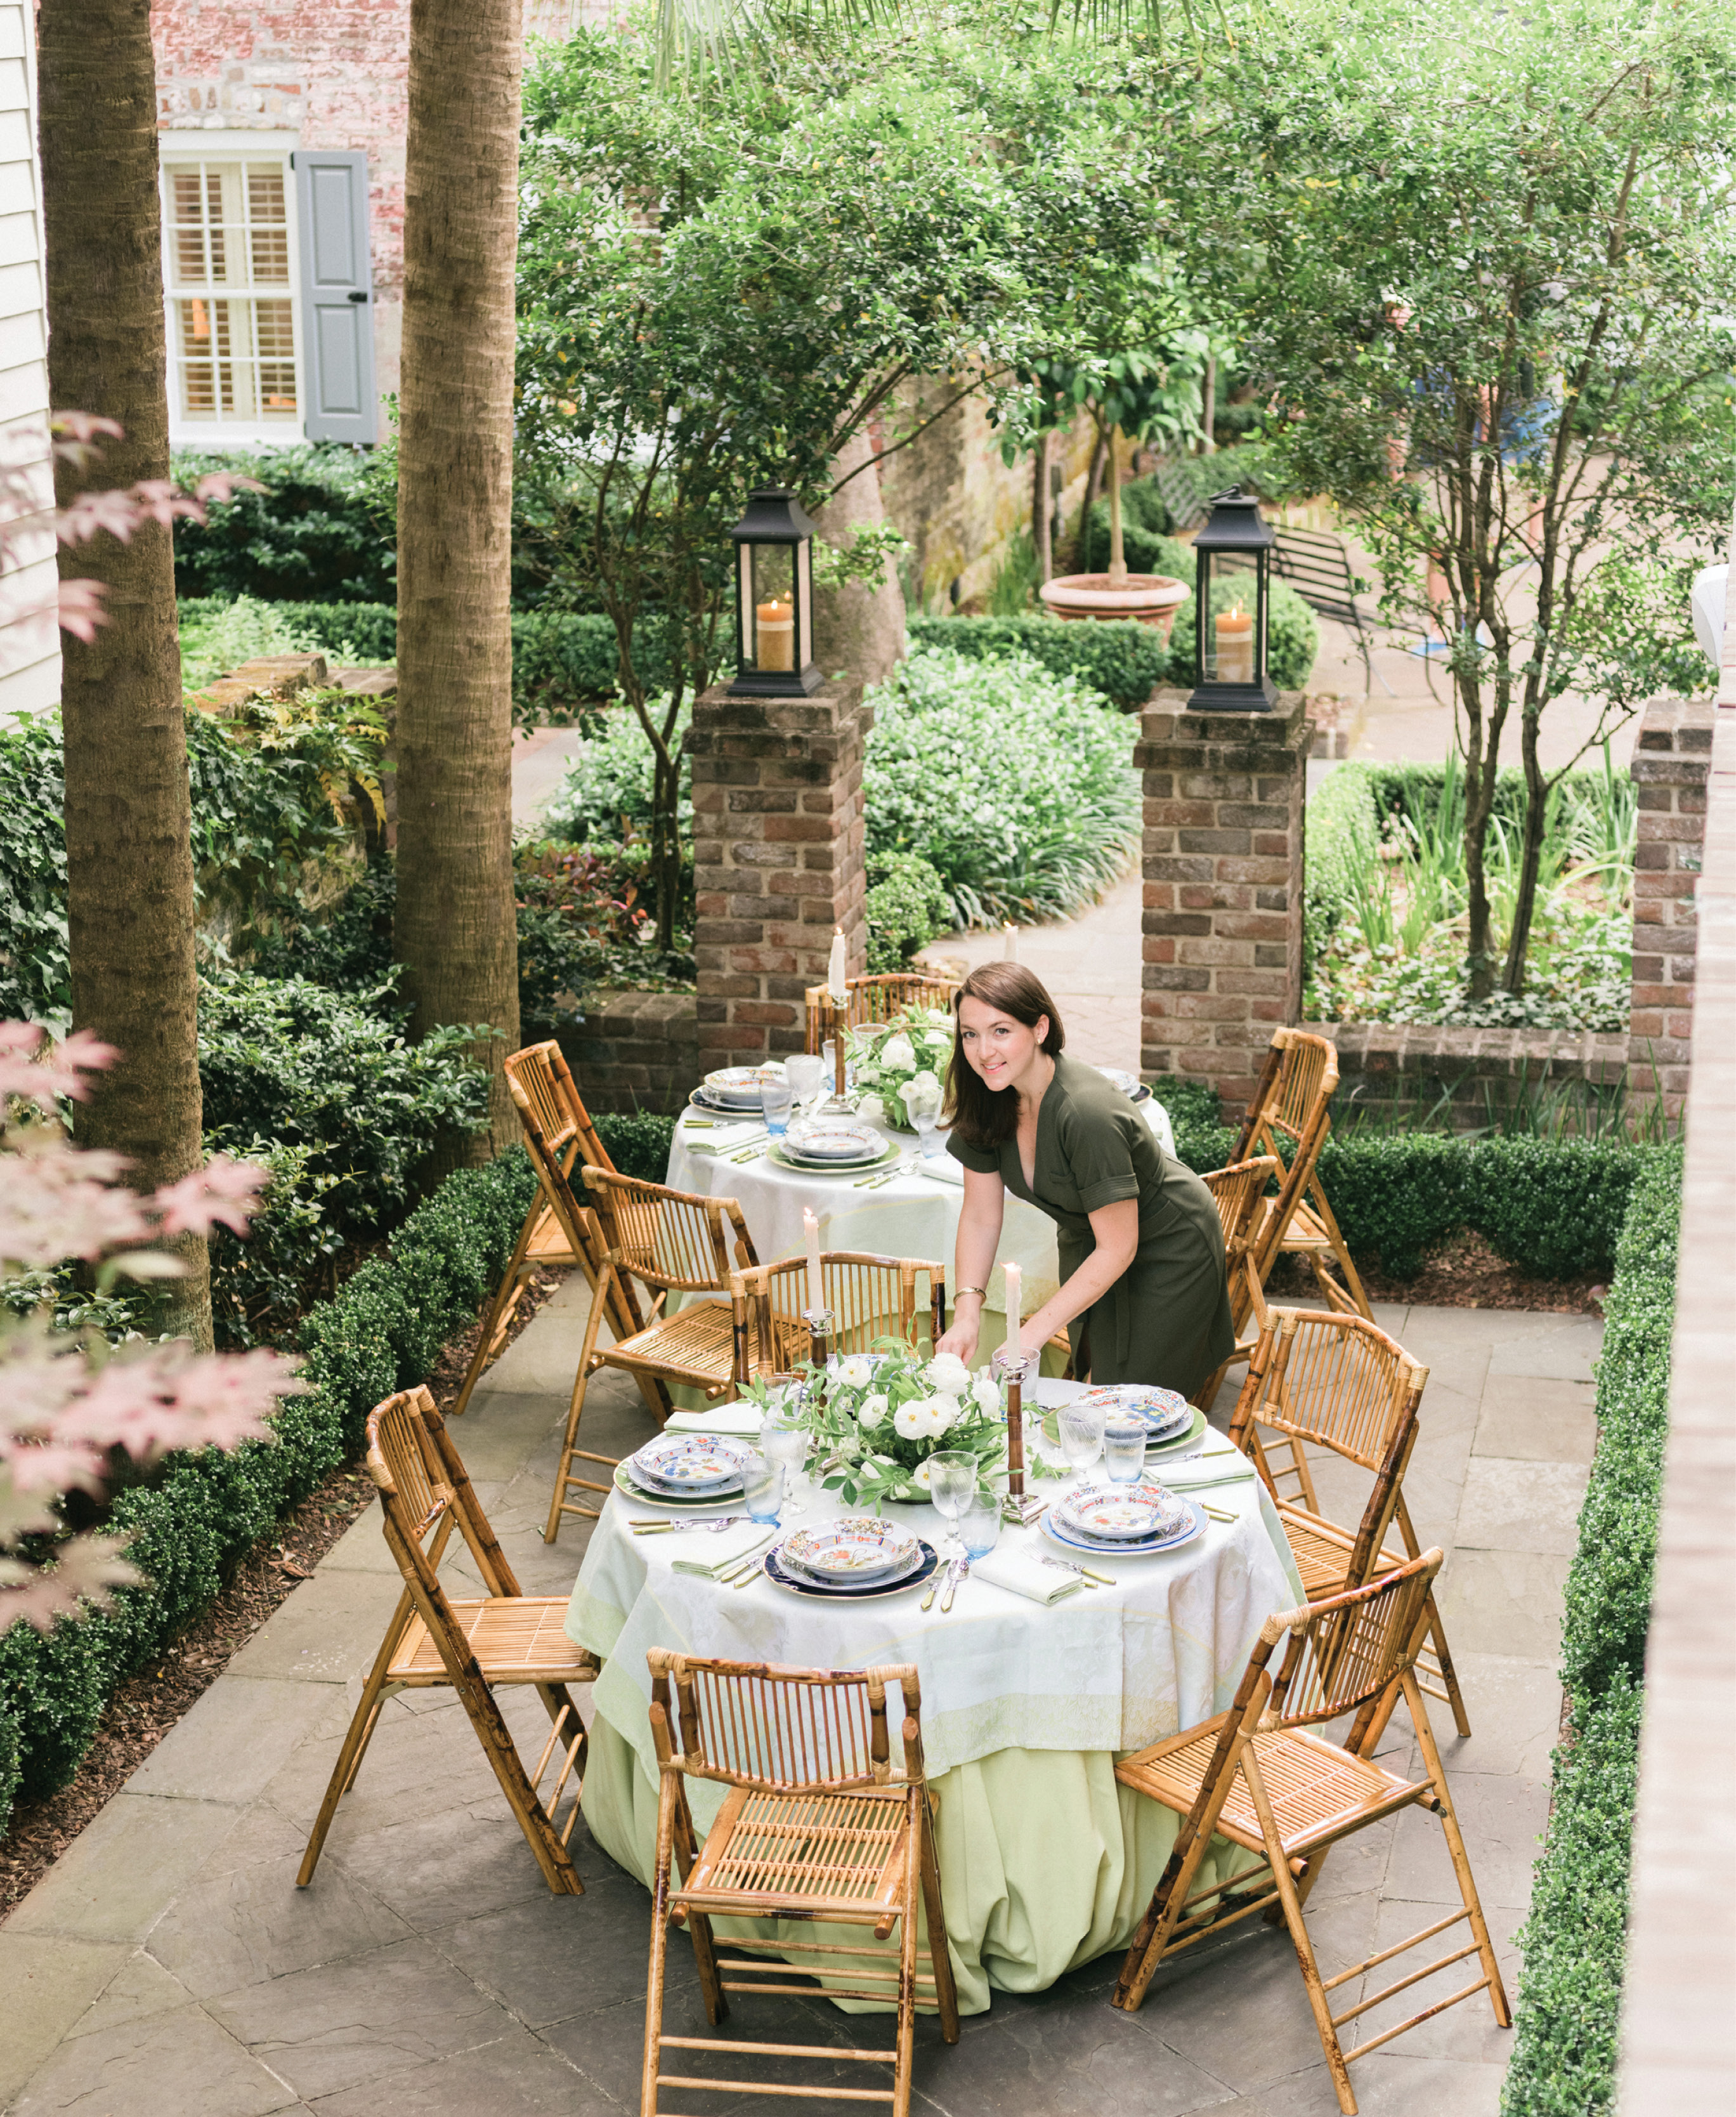 Augusta Cole, Lynn’s right hand at Easton Events, puts the finishing touches on the tables. “I chose two rounds to break up the long, narrow space,” Lynn explains. “I love creating intimate dinners, and nothing does that better than a 48-inch table.”